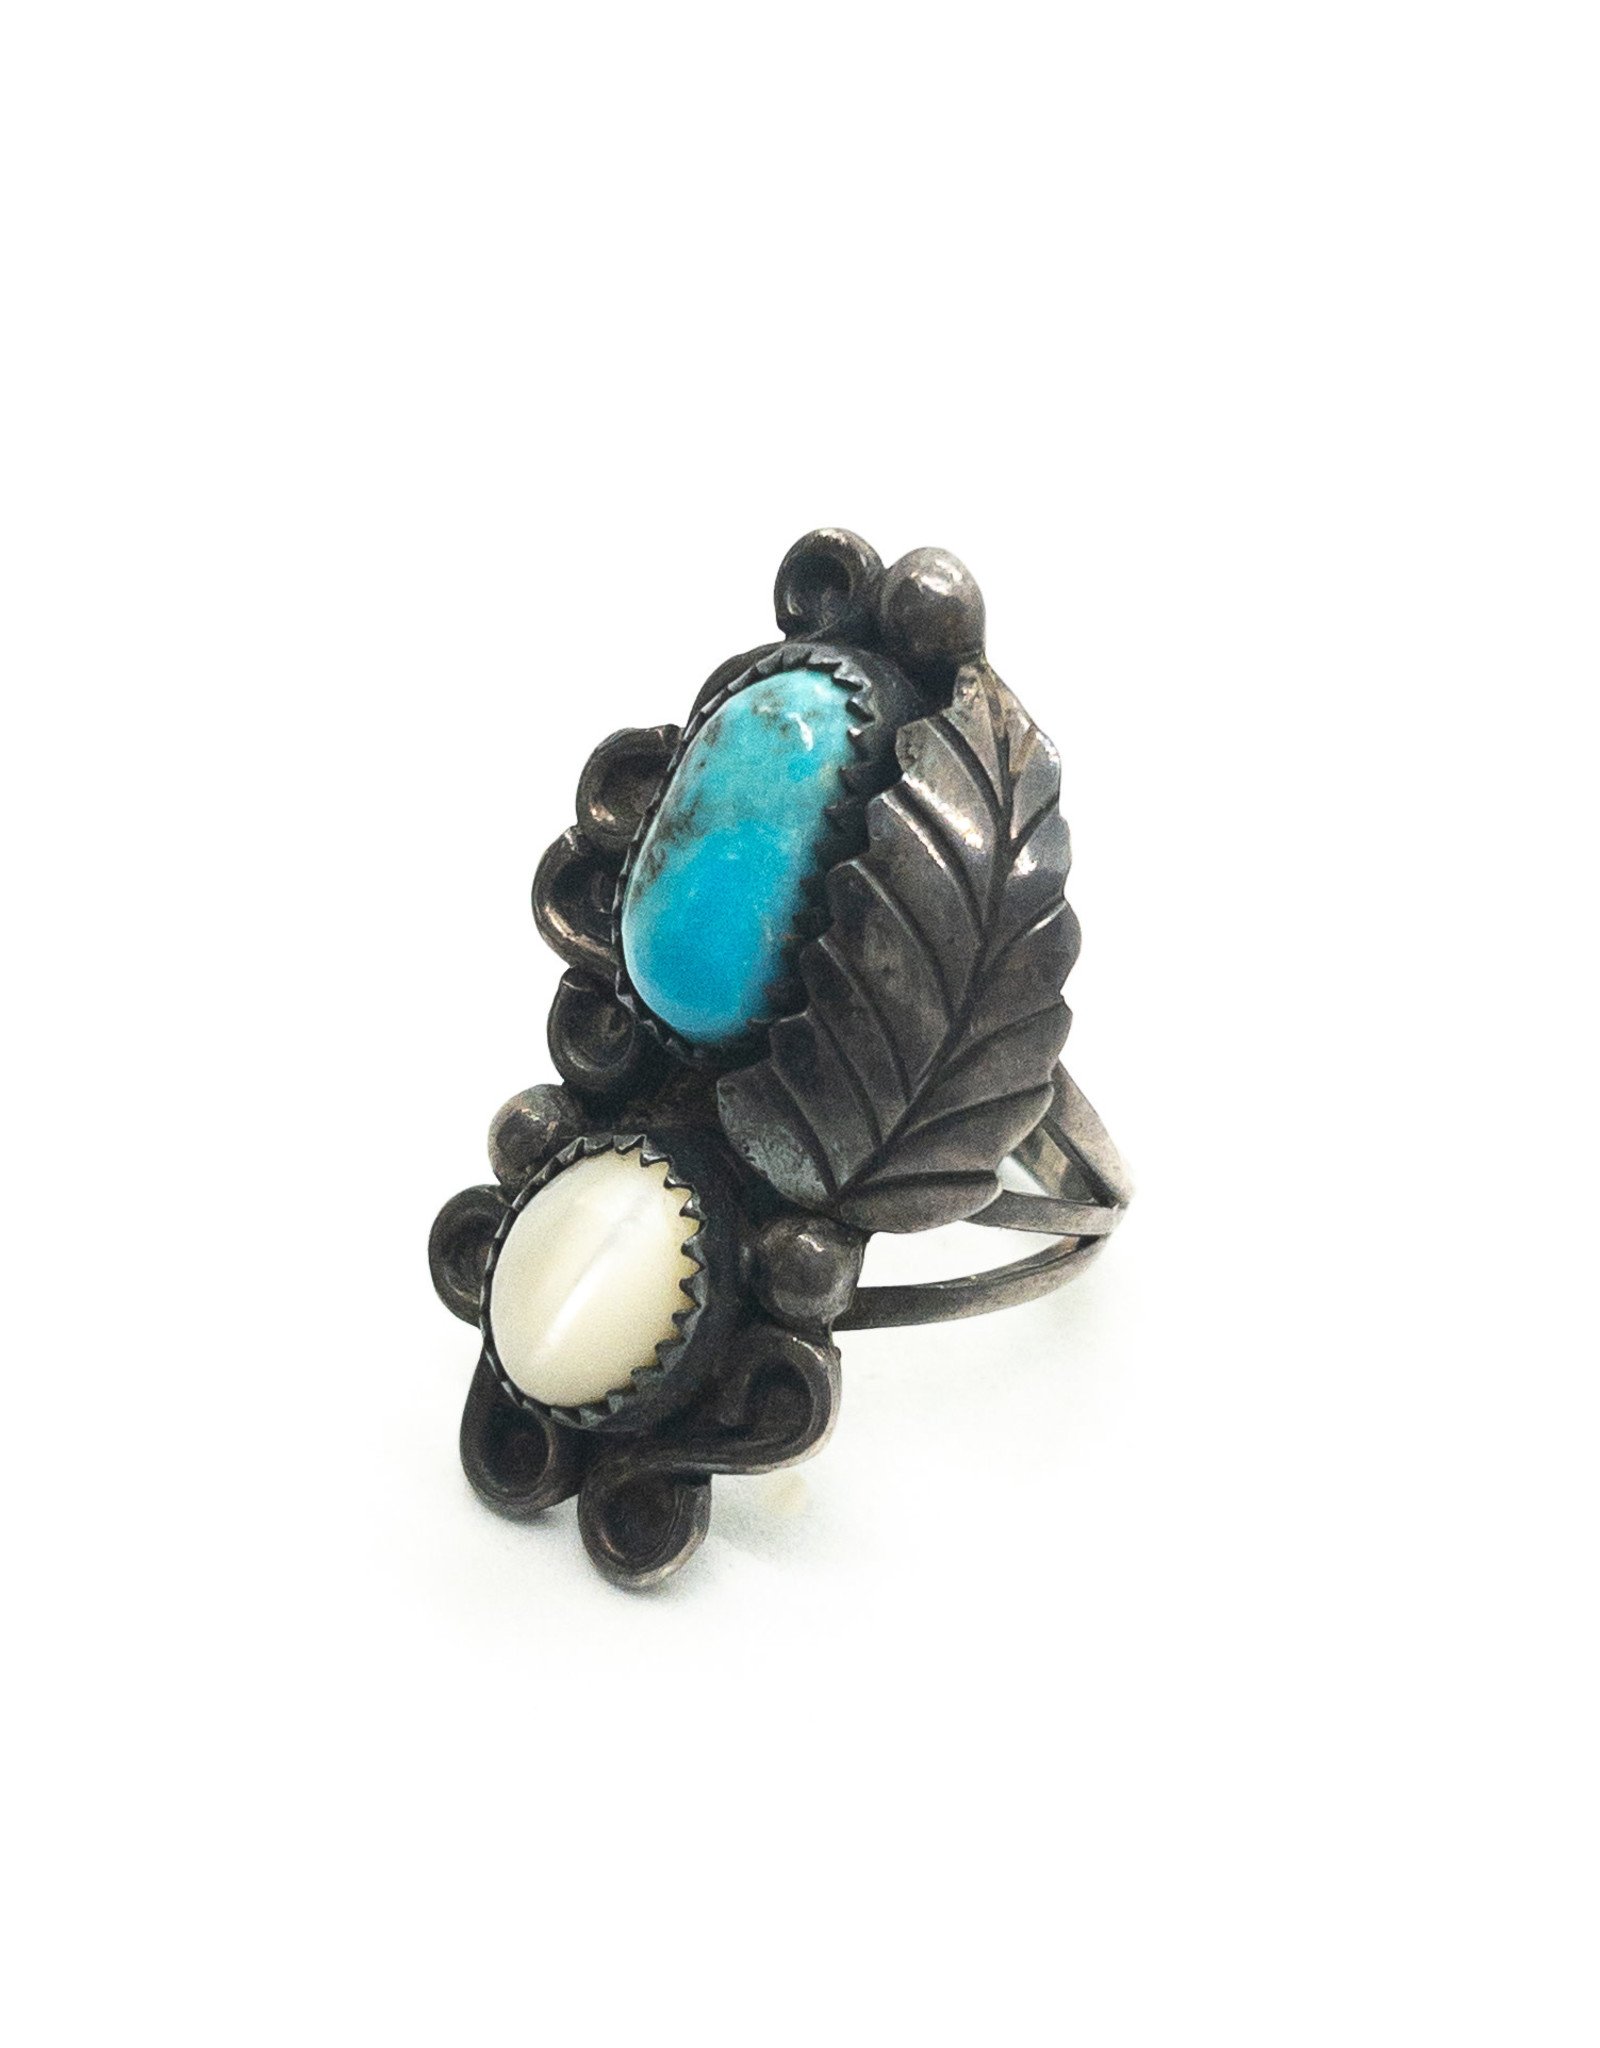 Vintage Silver Leaf and Ball Ring with Turquoise & White Chatoyant  Stones